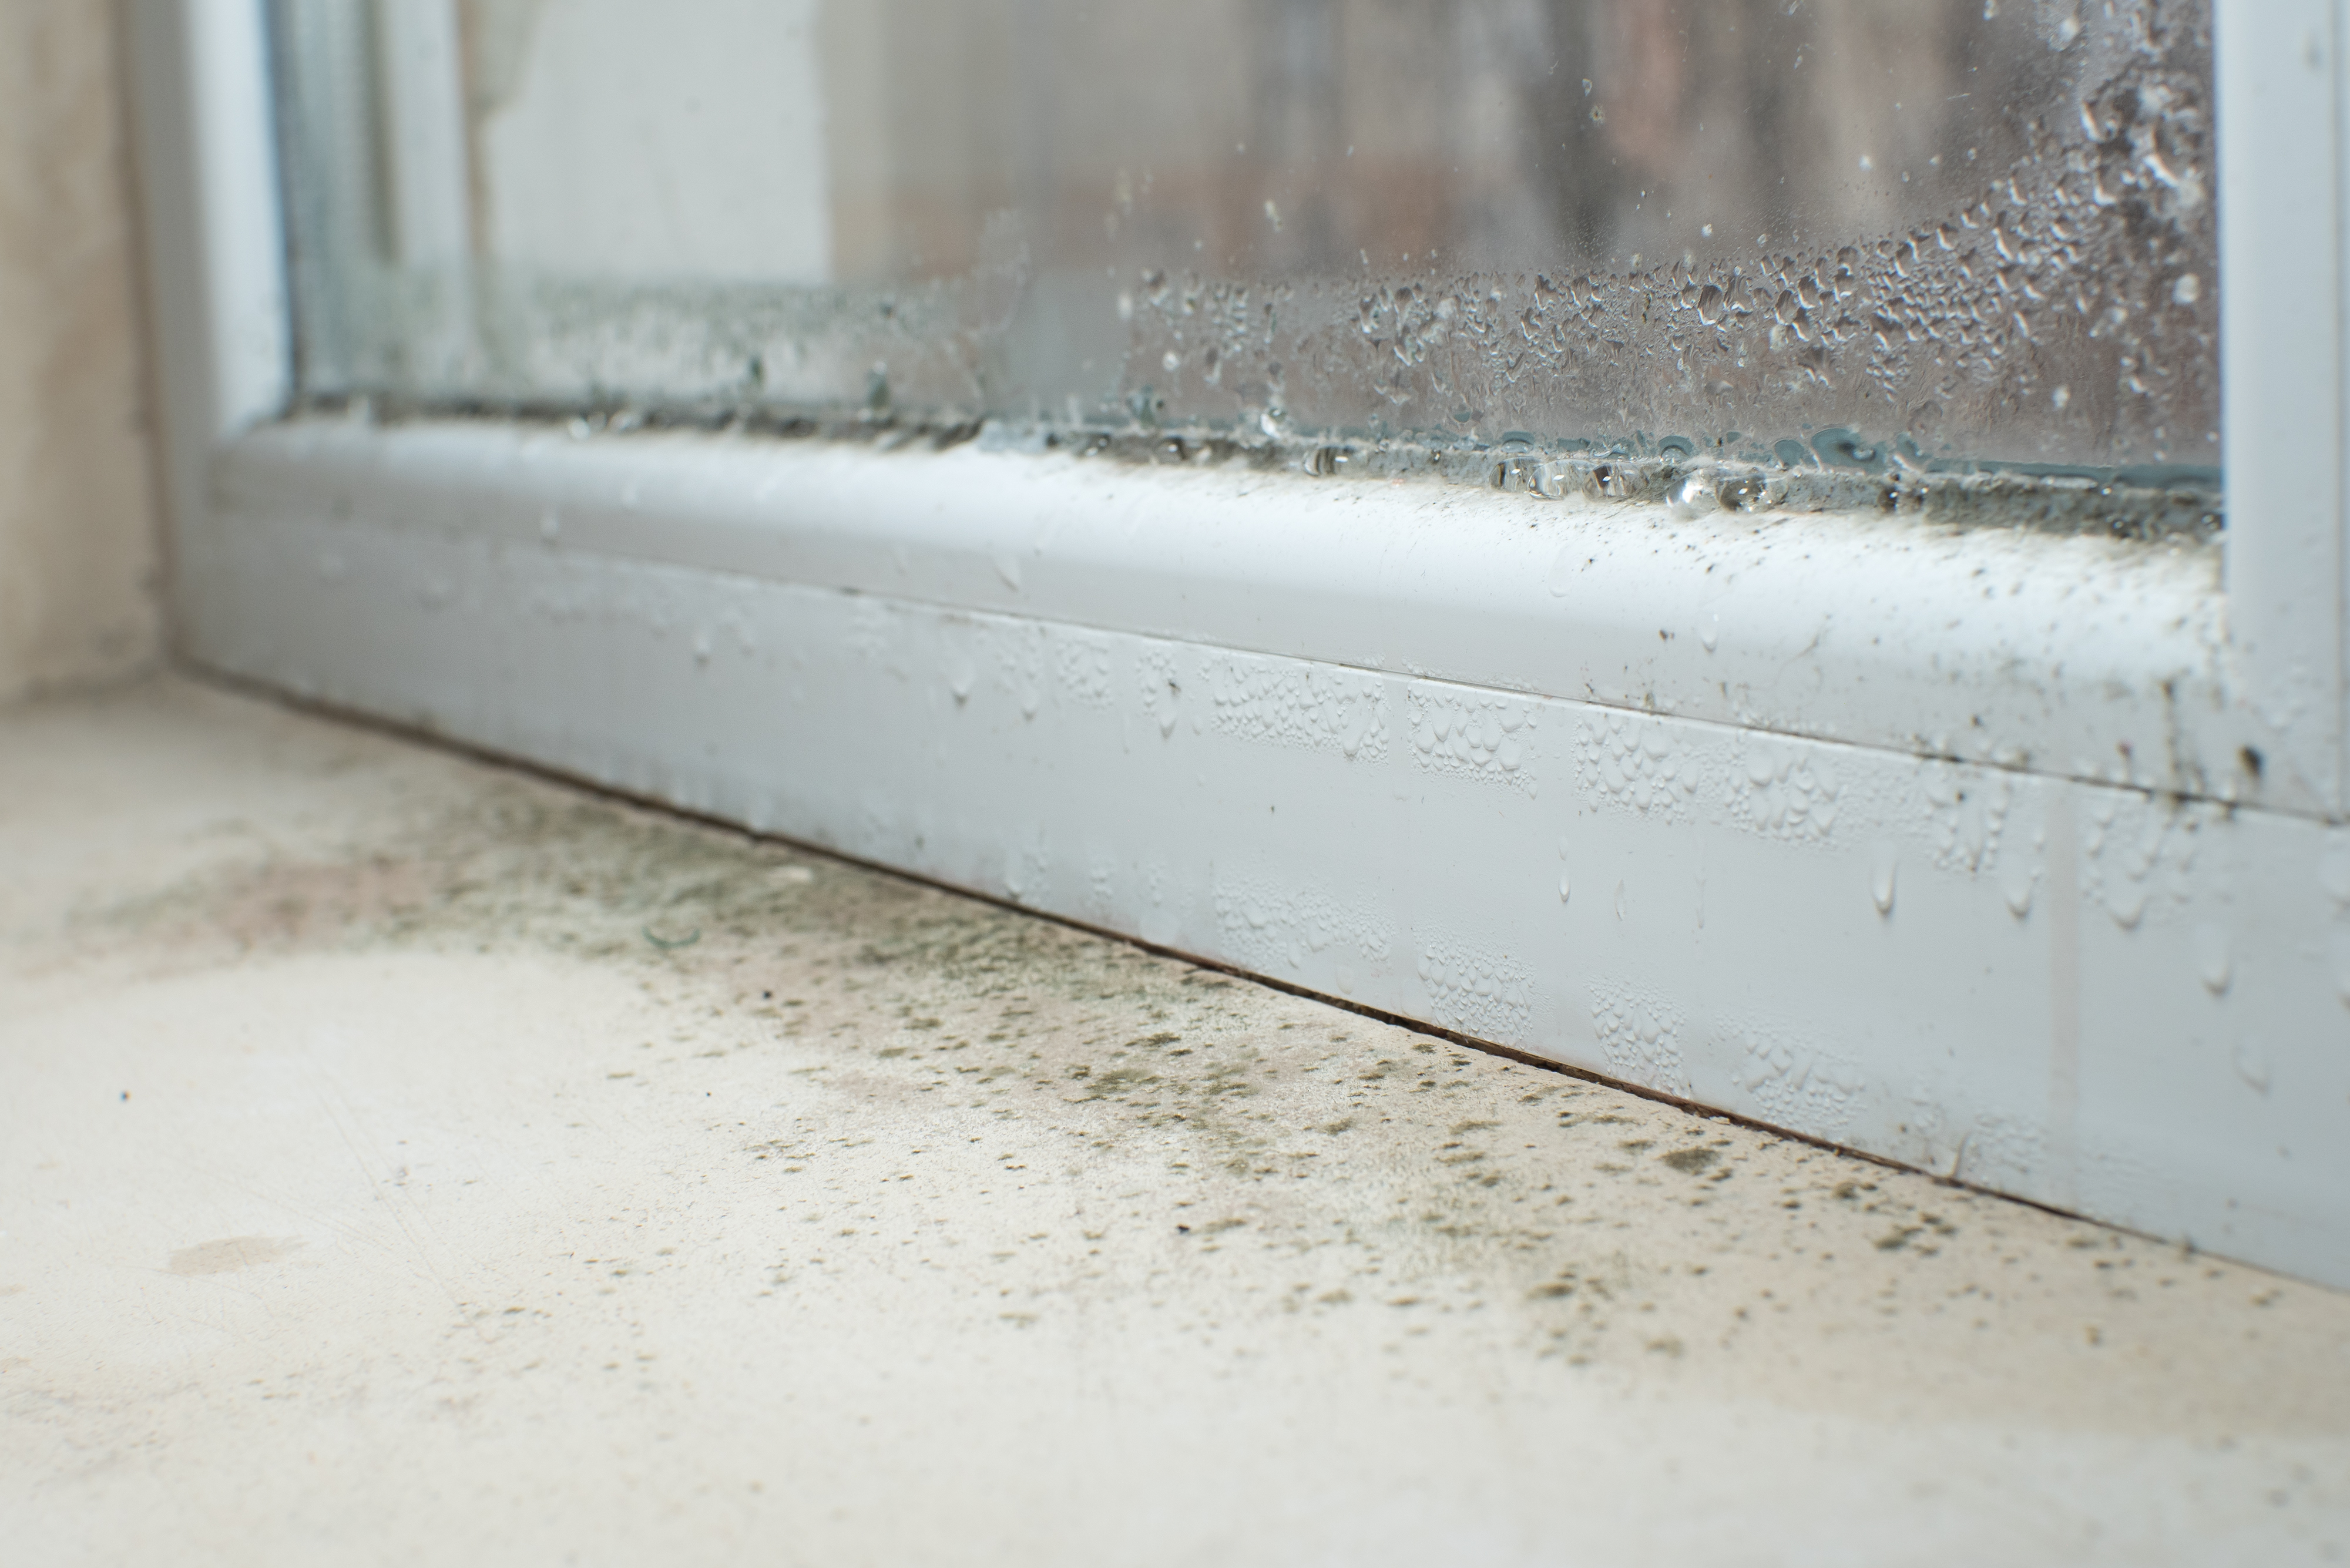 Condensation and moist air allows mould to spread